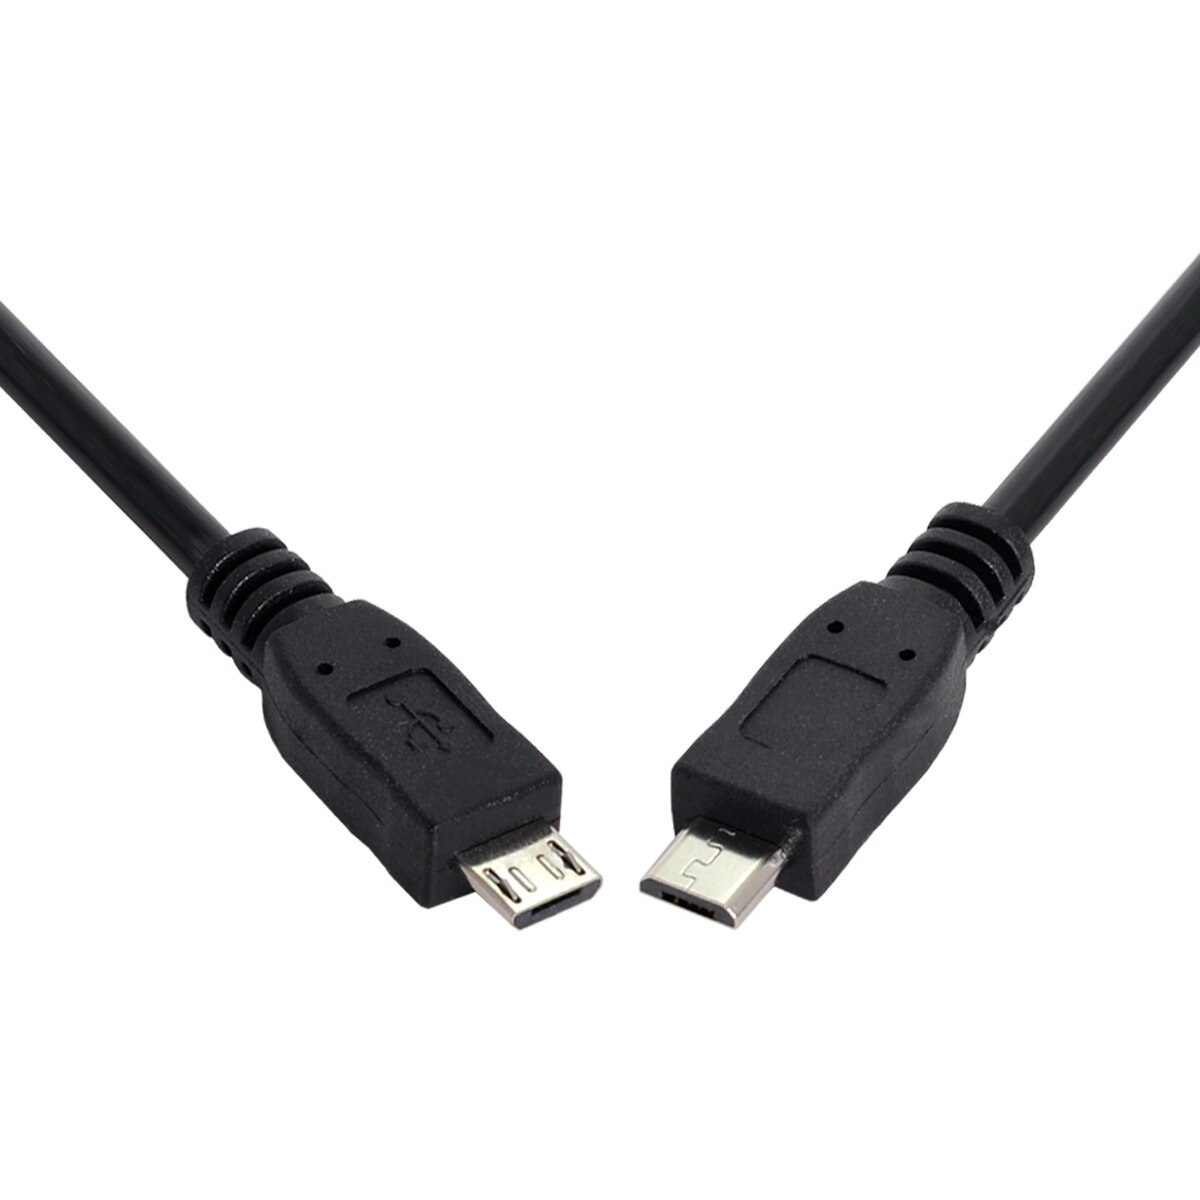 Cablecc Micro Usb Male Naar Micro Usb Male Gegevens Charger Kabel 100Cm Voor MP4 Mobiele Telefoon